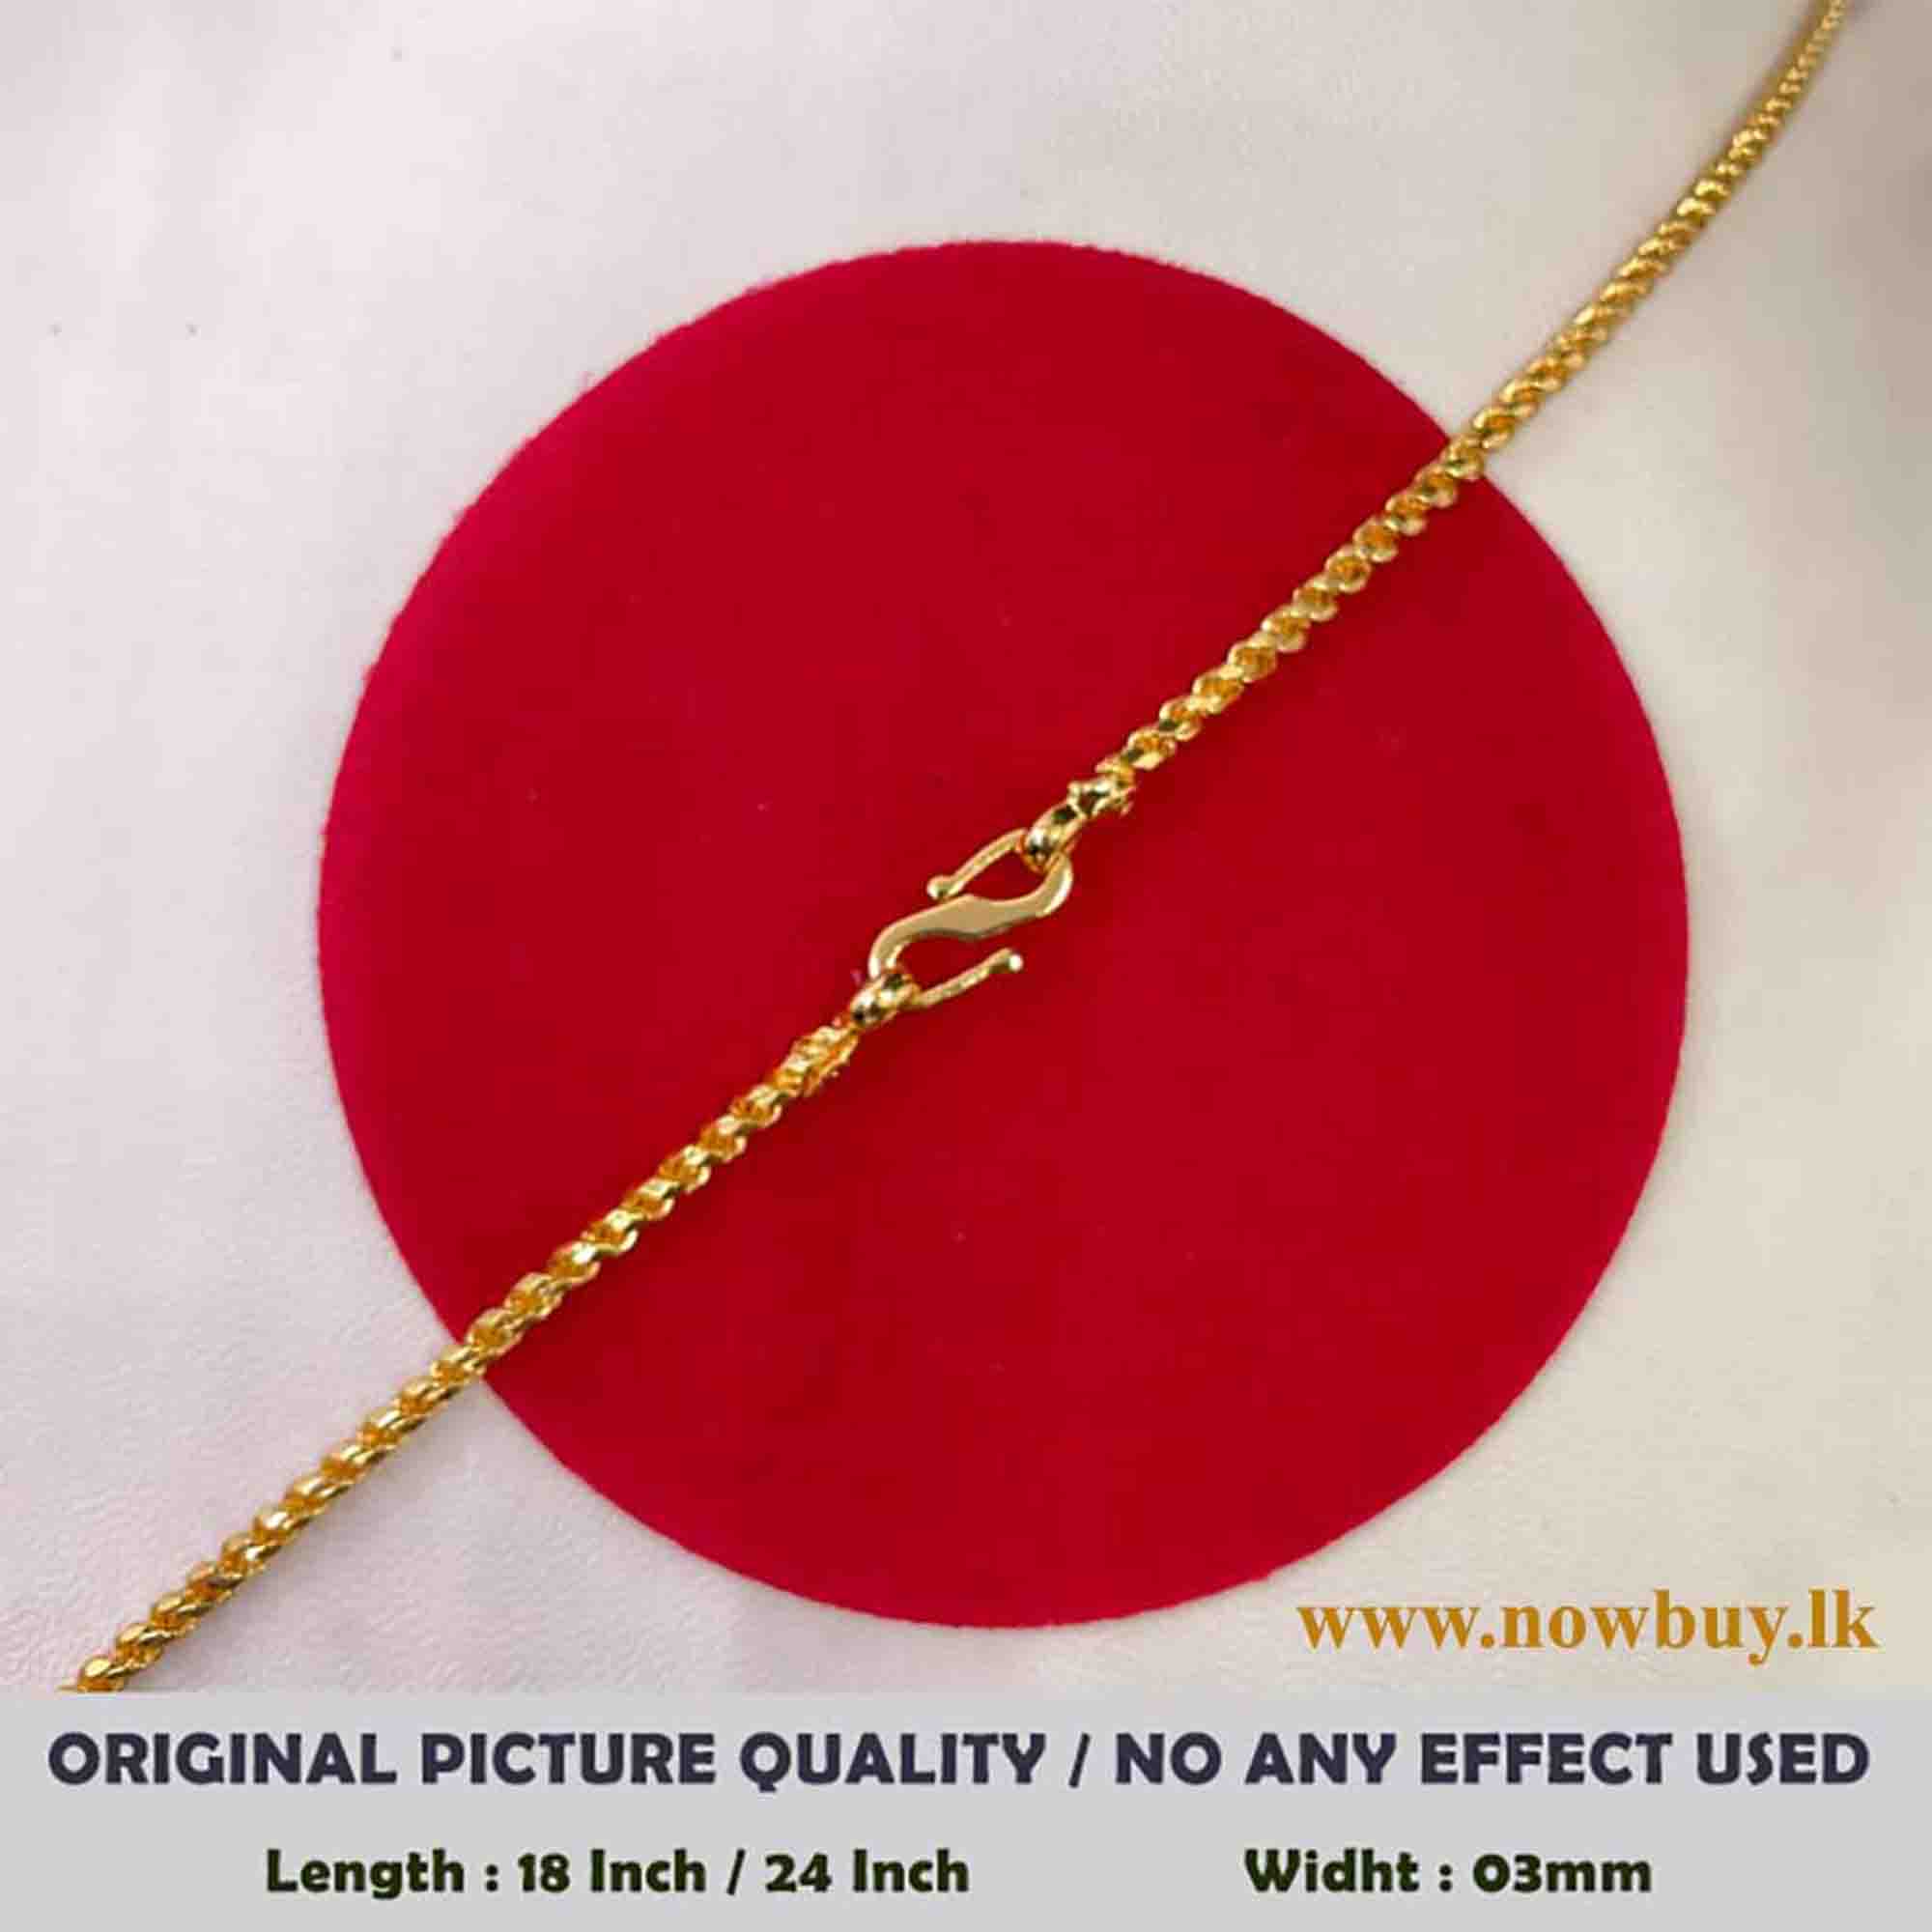 Gold Plated Snack Rope Chain (Round) 18/24 Inch Necklaces NowBuy.lk 3